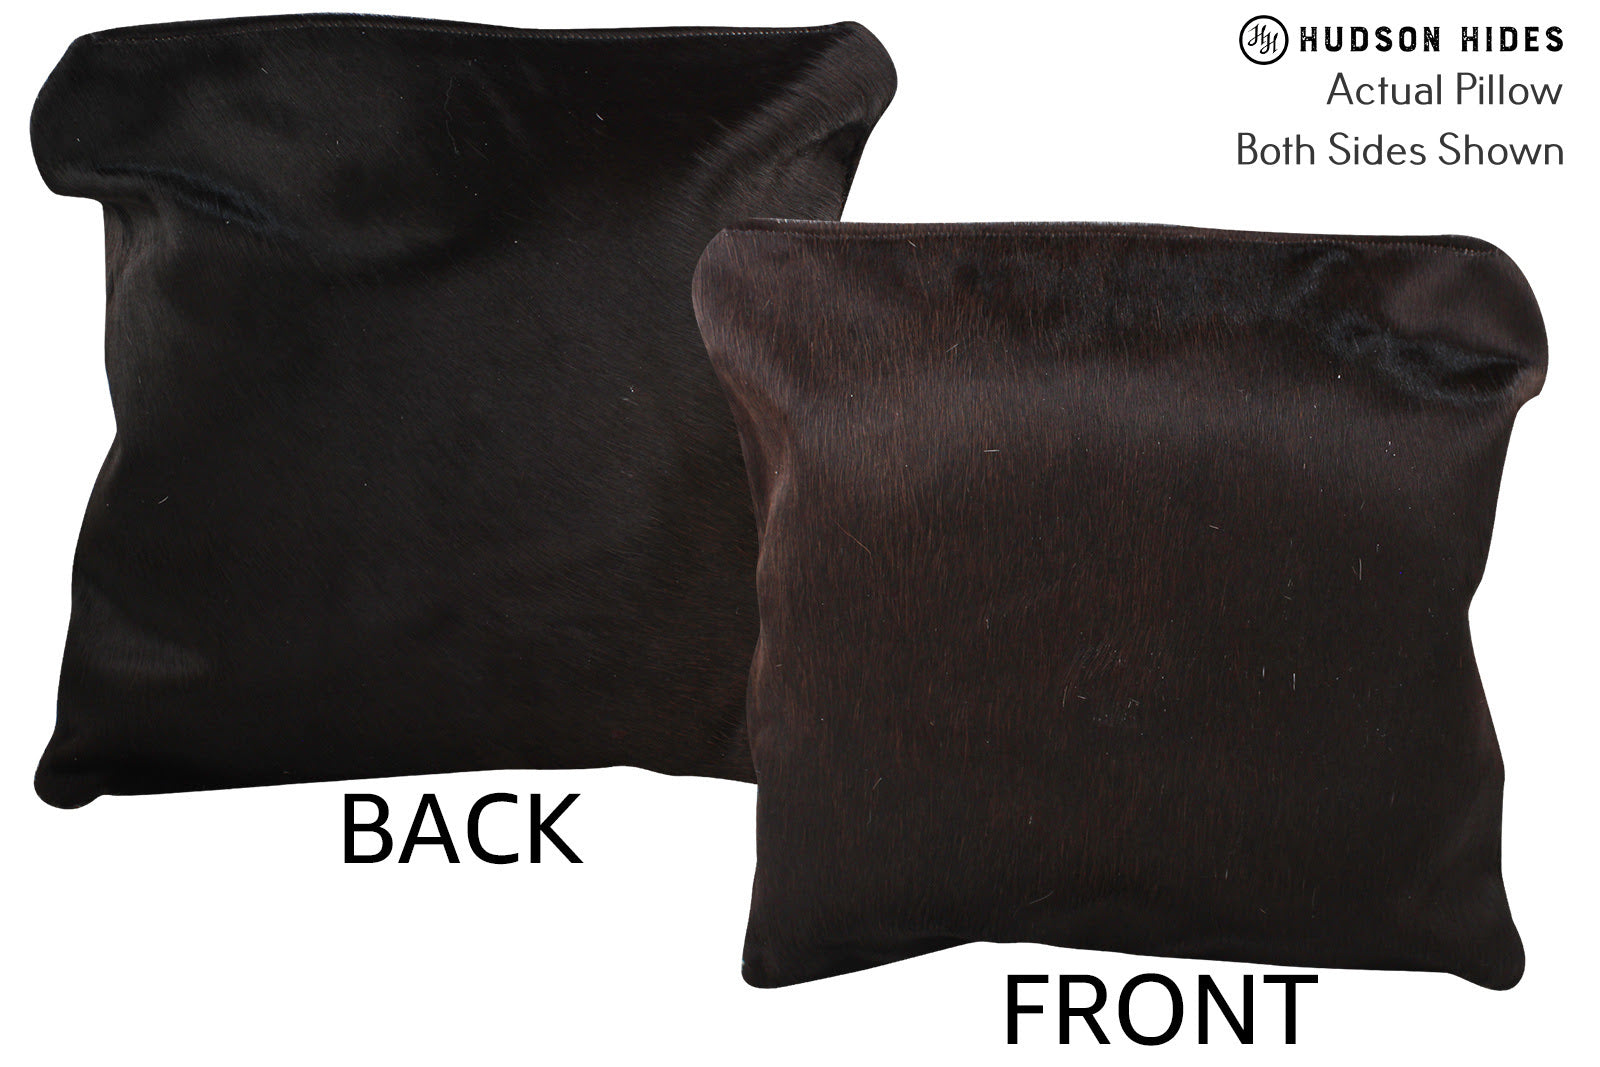 Solid Black Cowhide Pillow #74539